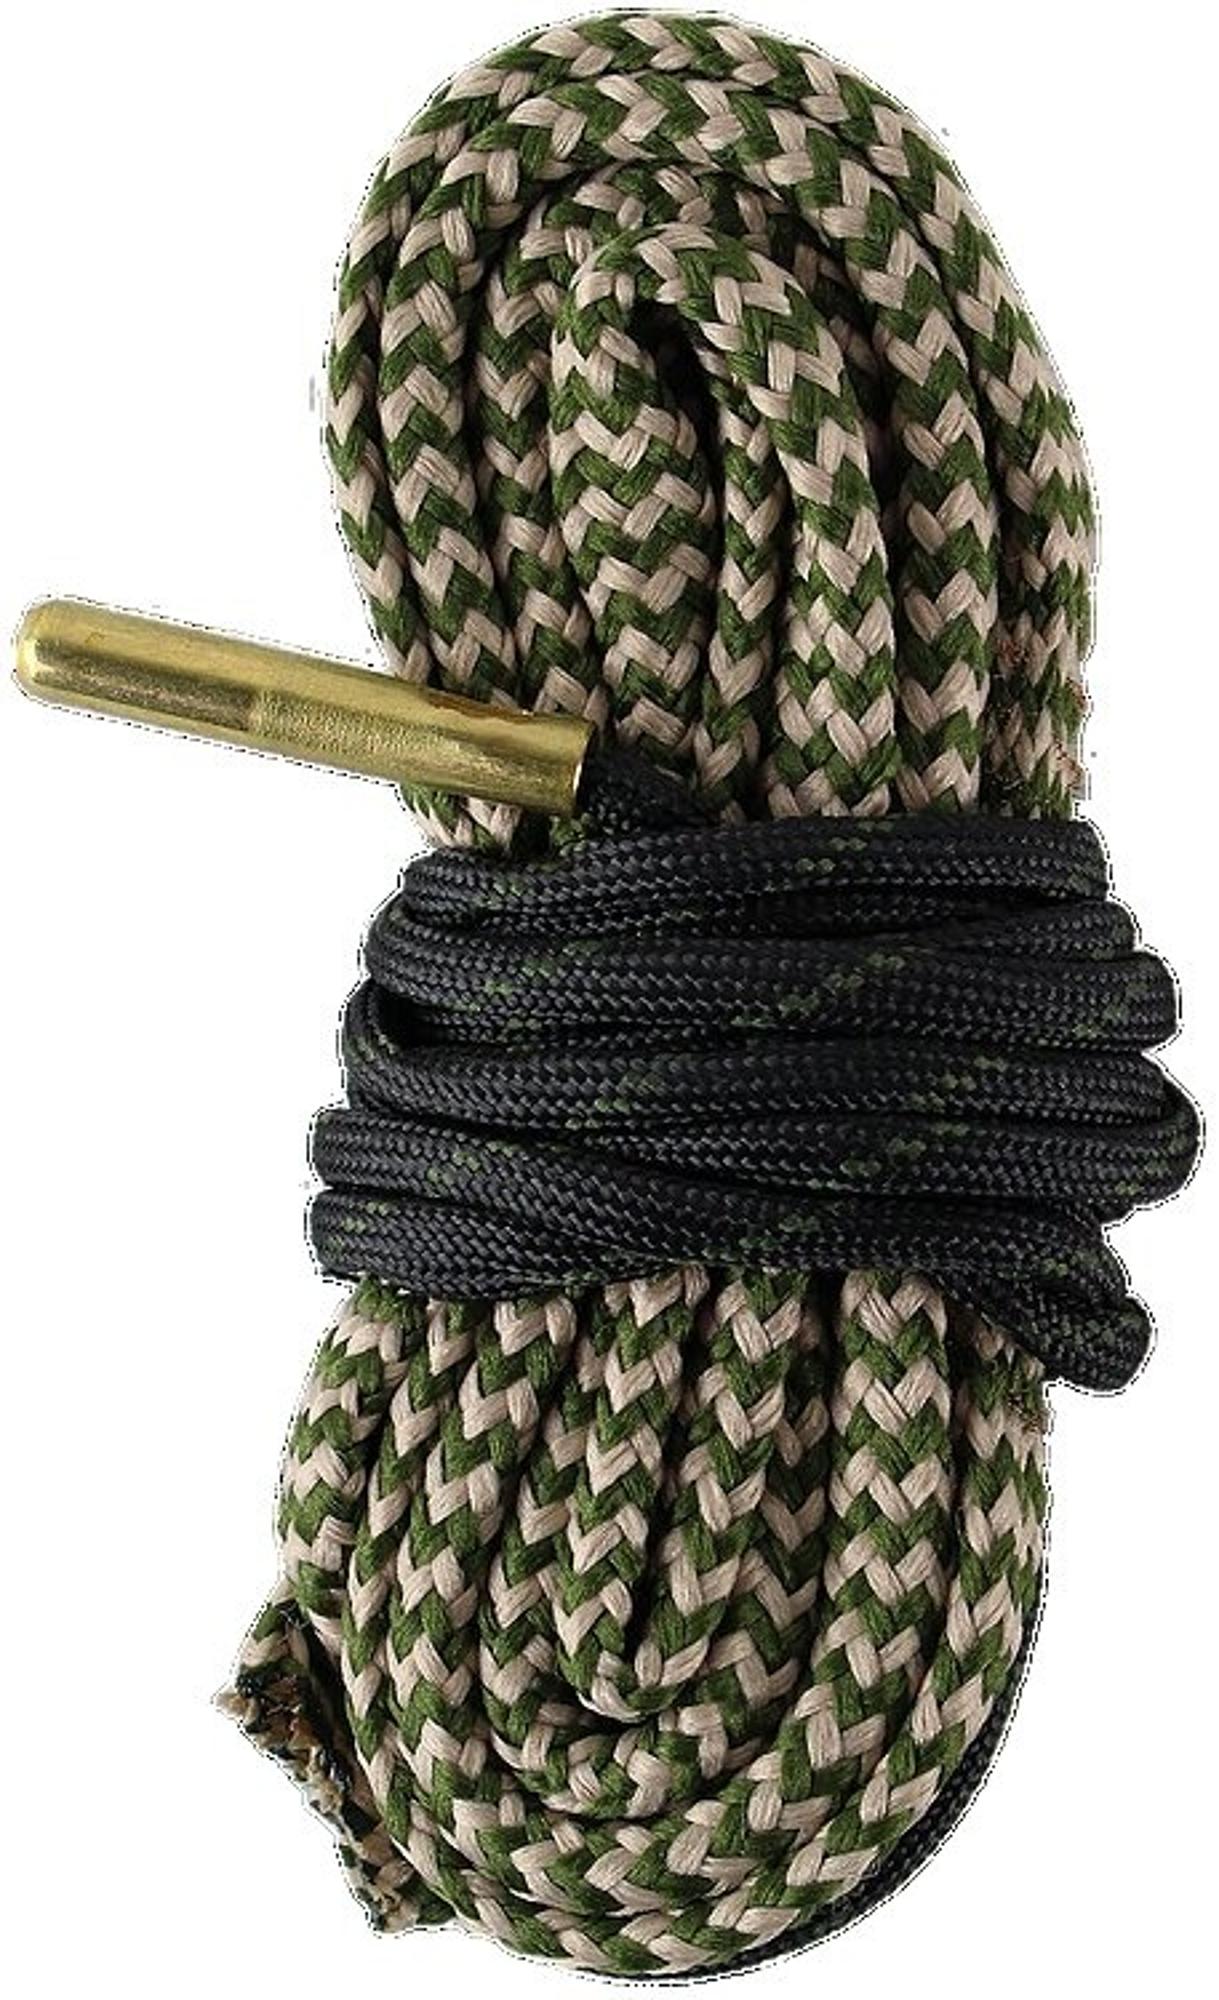 RIFLE PULL THROUGH ROPE CLEANER 6.5